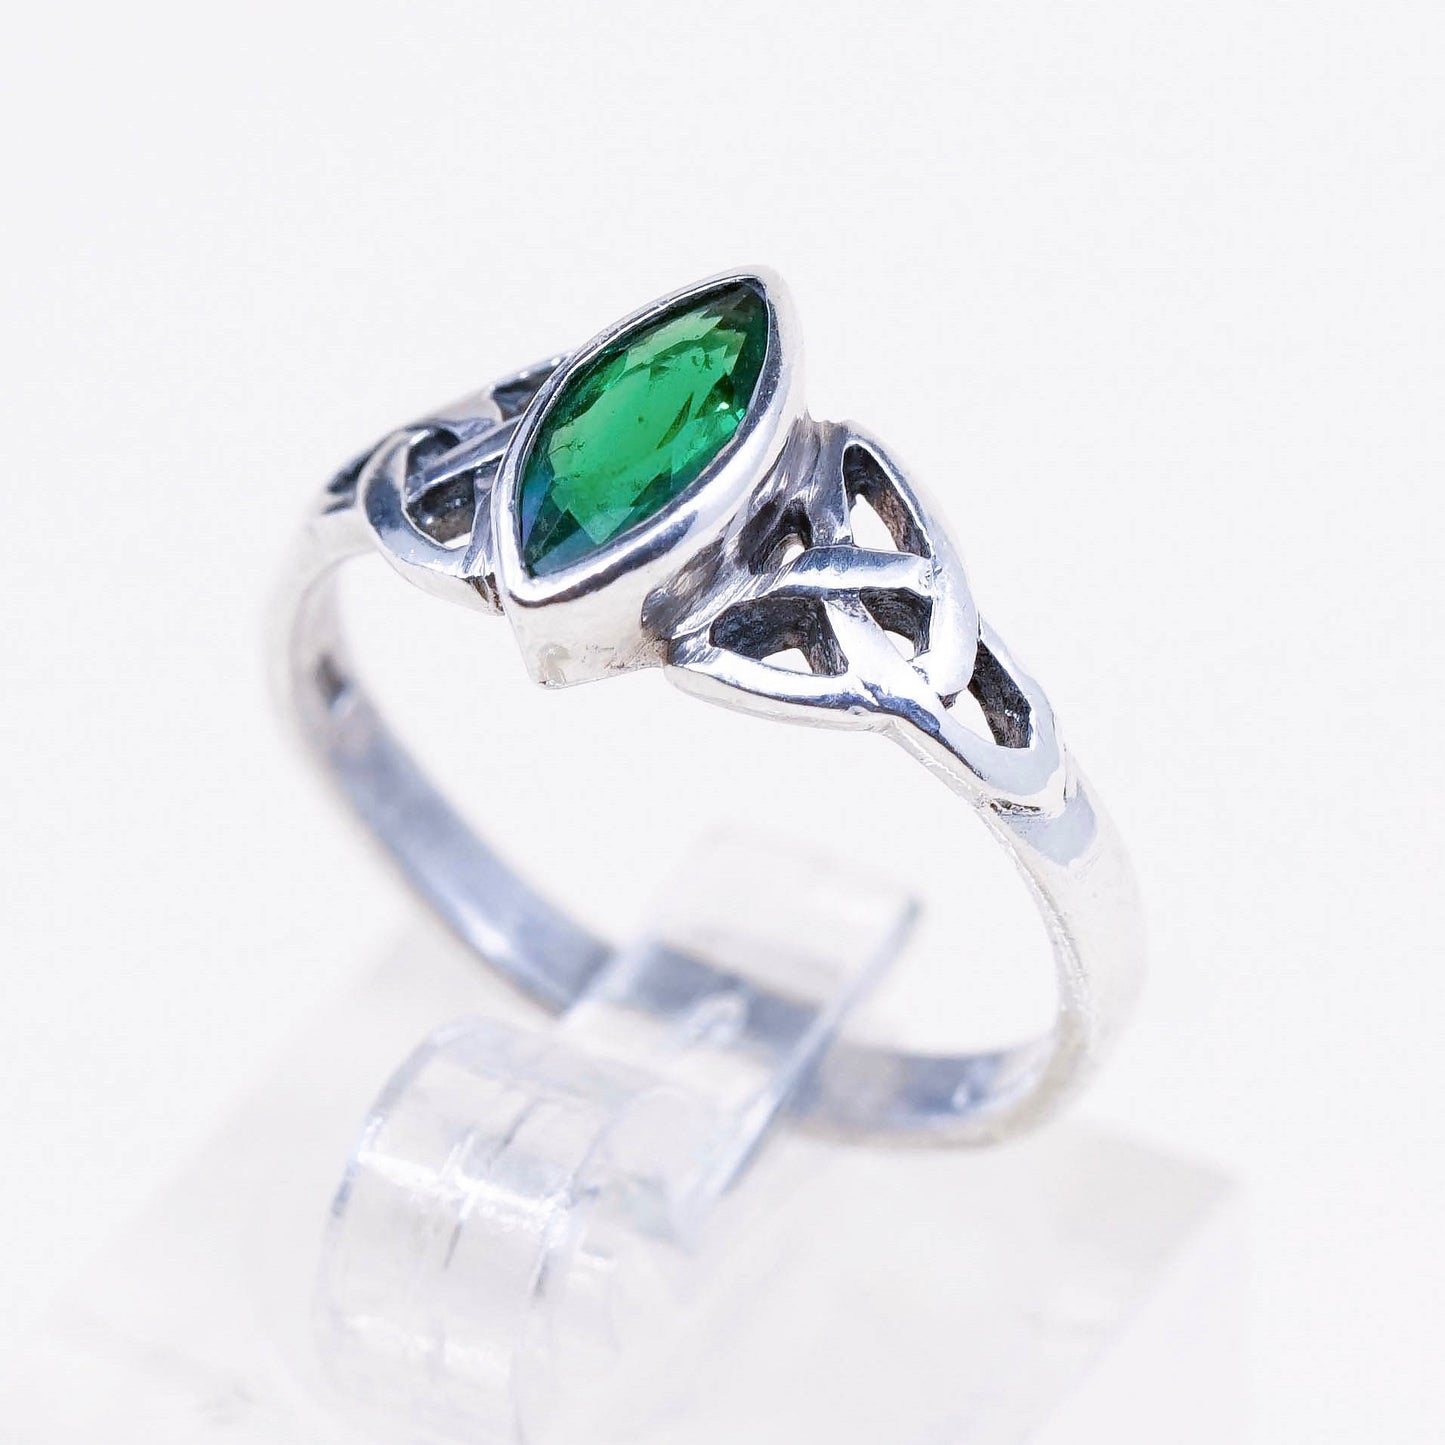 Size 6.75, Vintage sterling 925 silver handmade ring with peridot